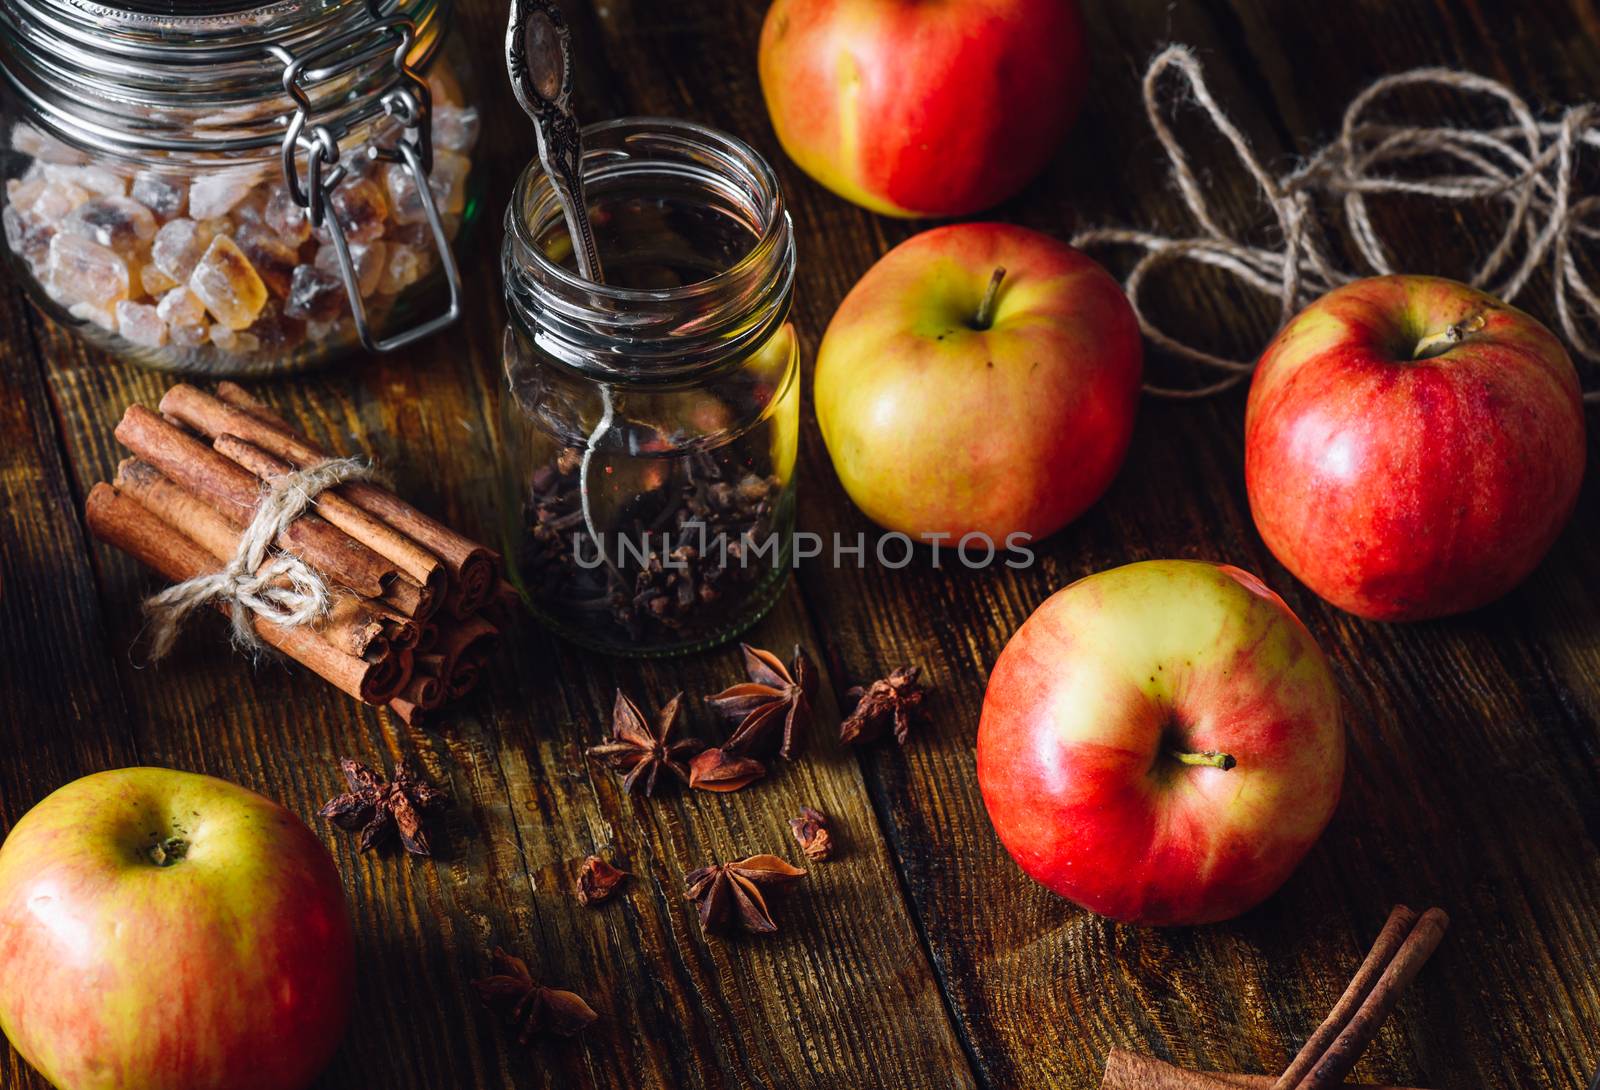 Red Apples with Different Spices on Wooden Table.